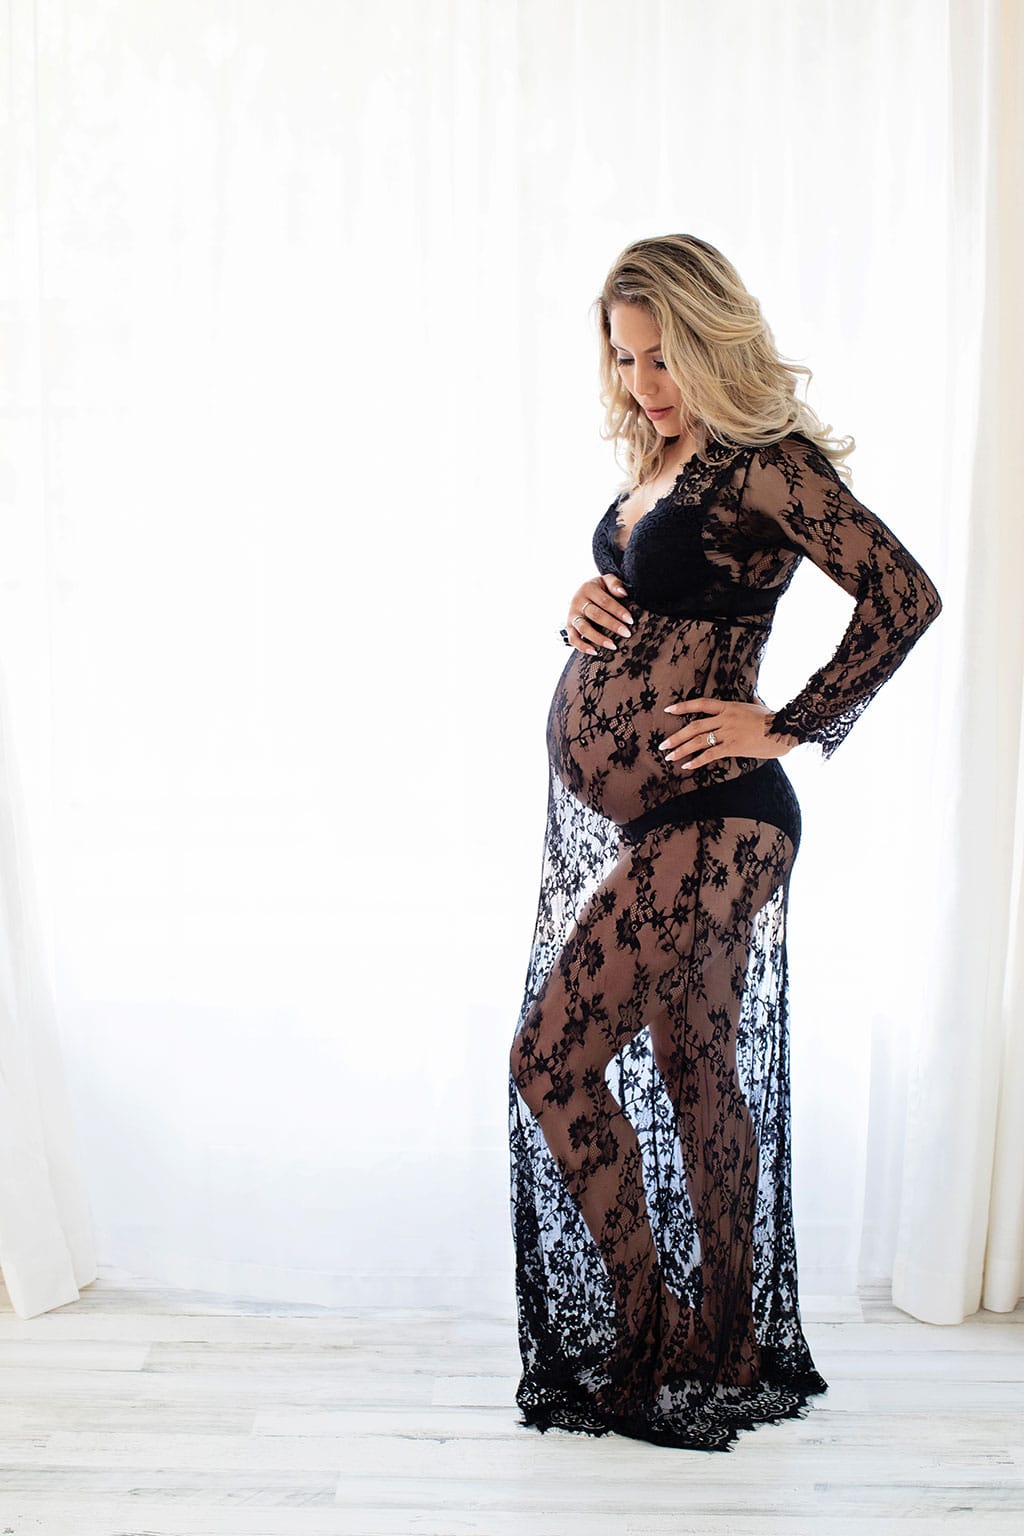 expecting mom poses in floor-length lace dress showing off her belly